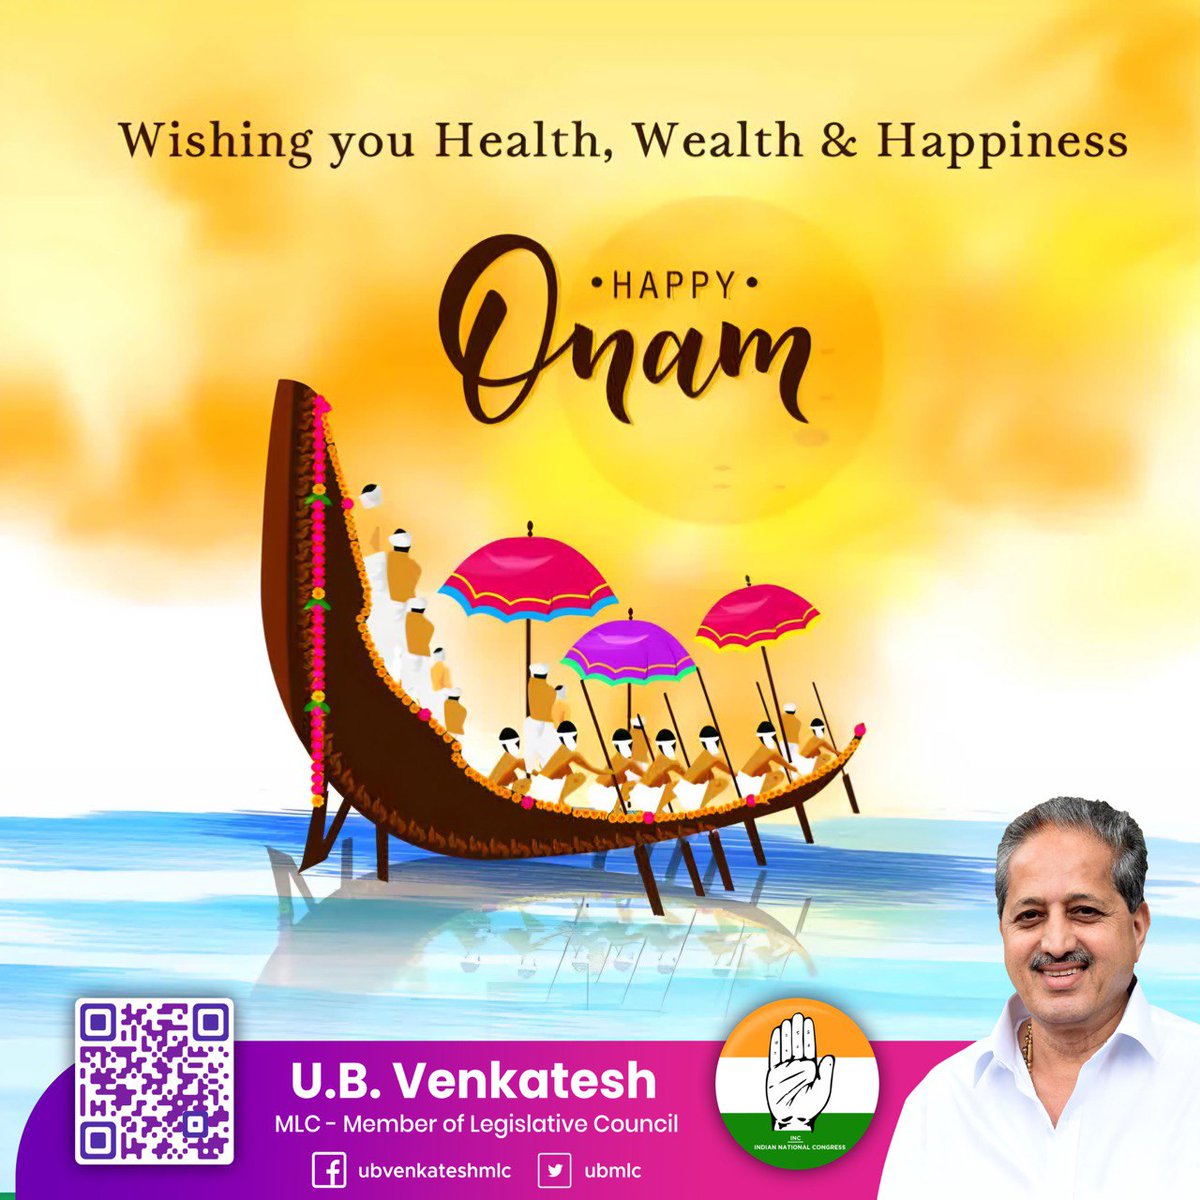 Happy Onam. May this festive season bring you joy prosperity, and cherished moments with loved ones.